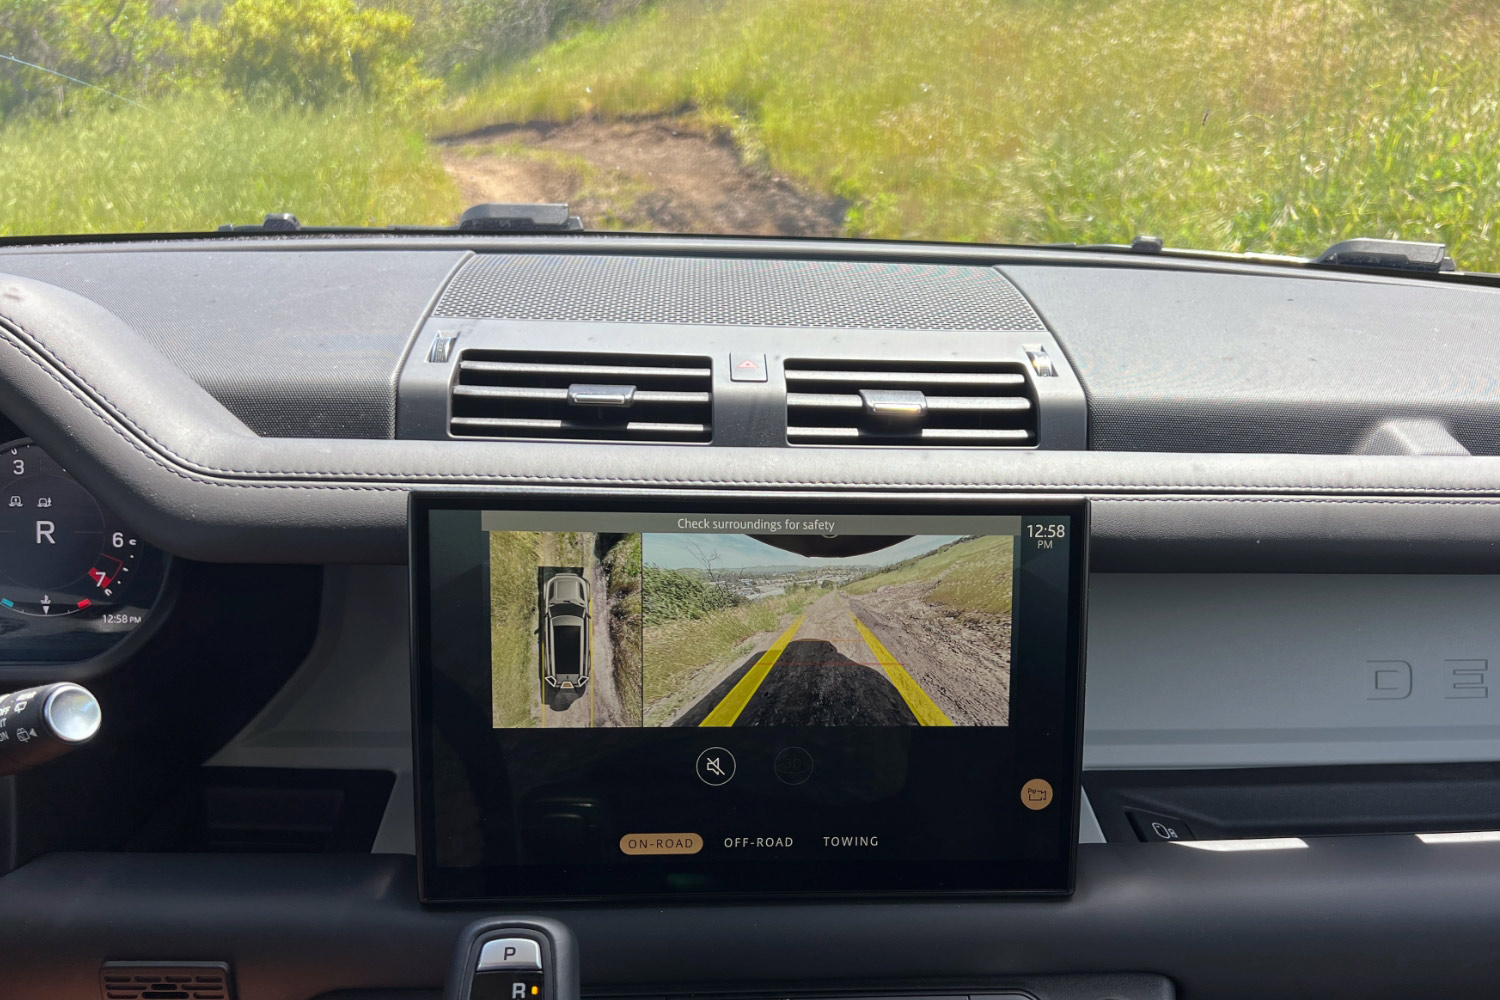 The center infotainment screen showing two views from the Defender 130's cameras